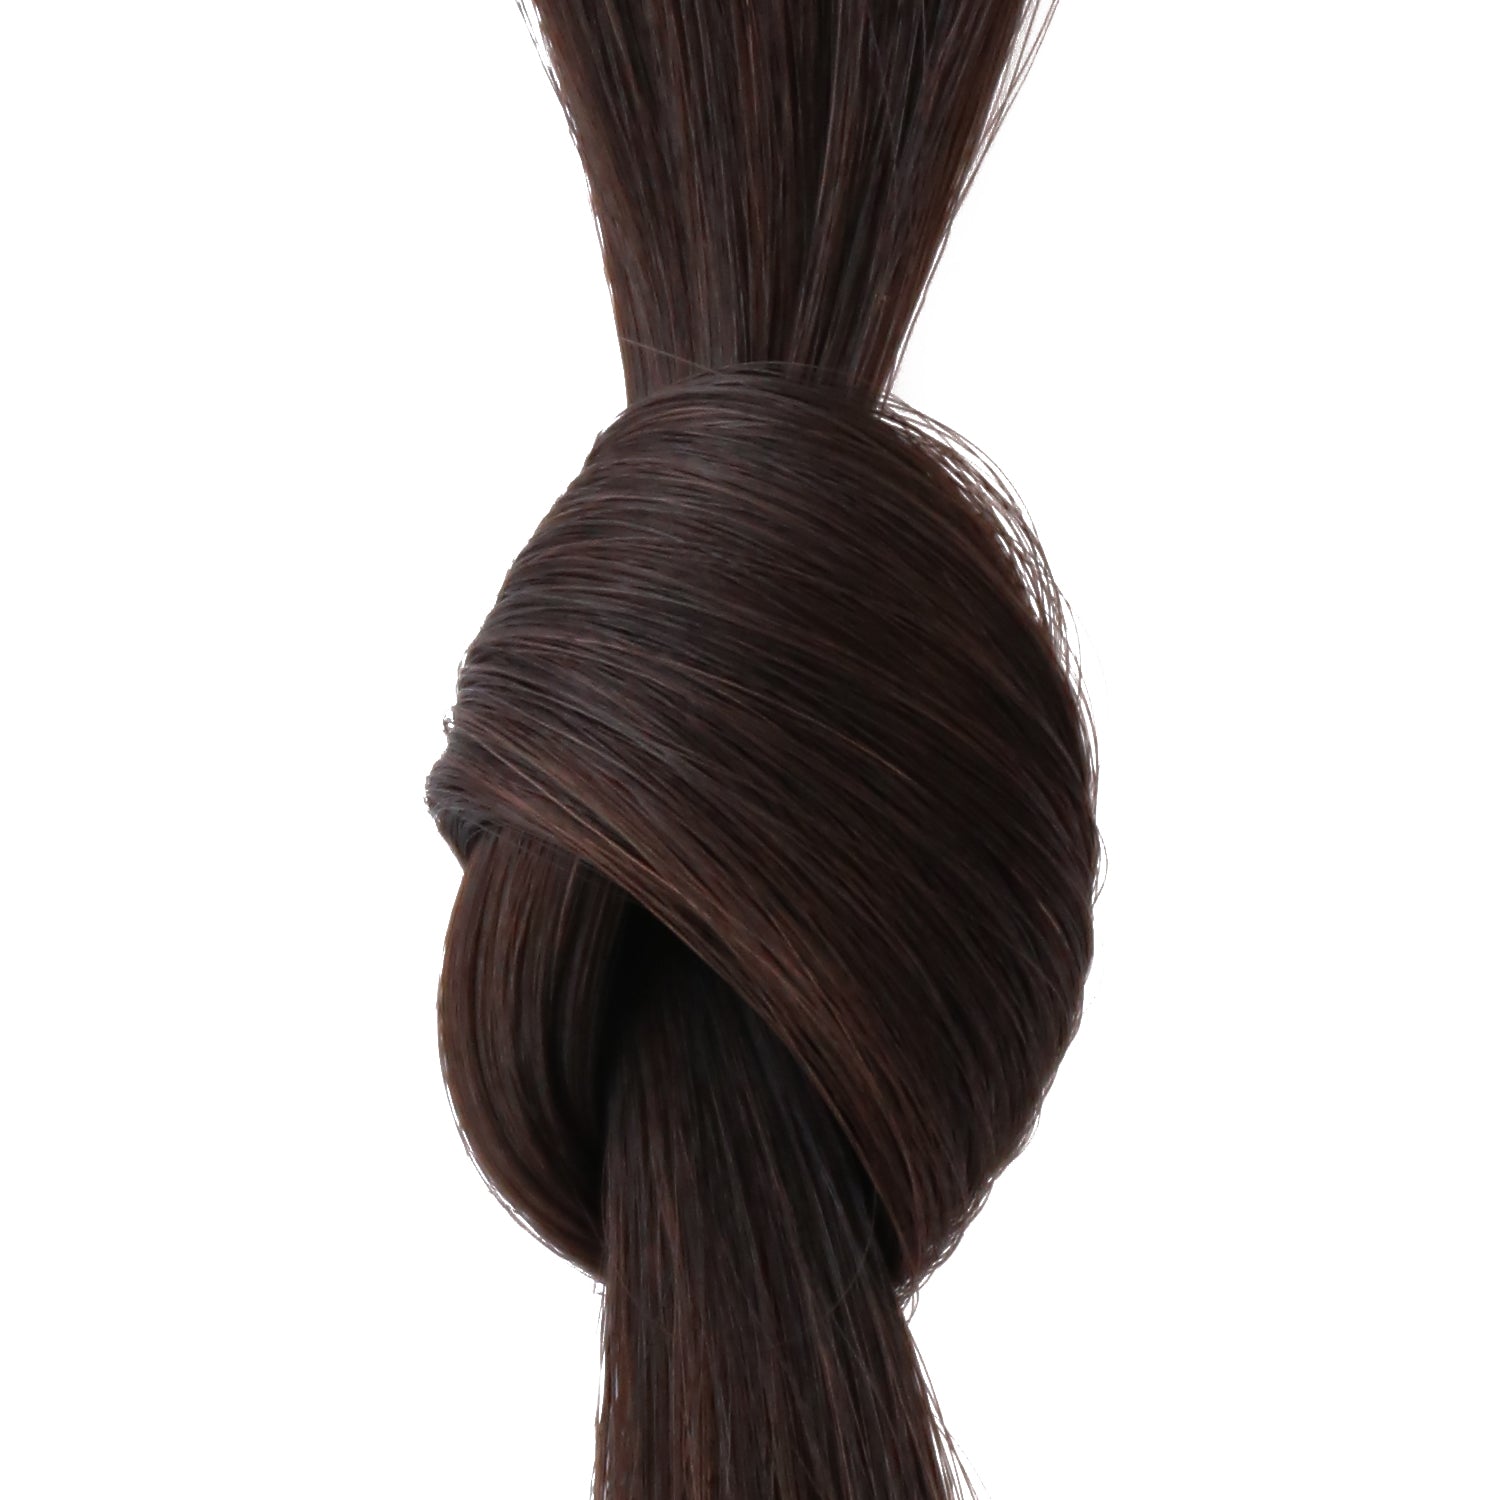 2 - Prime Tape In Dark Natural Brown - True chromatic and universally rich shades of natural color.